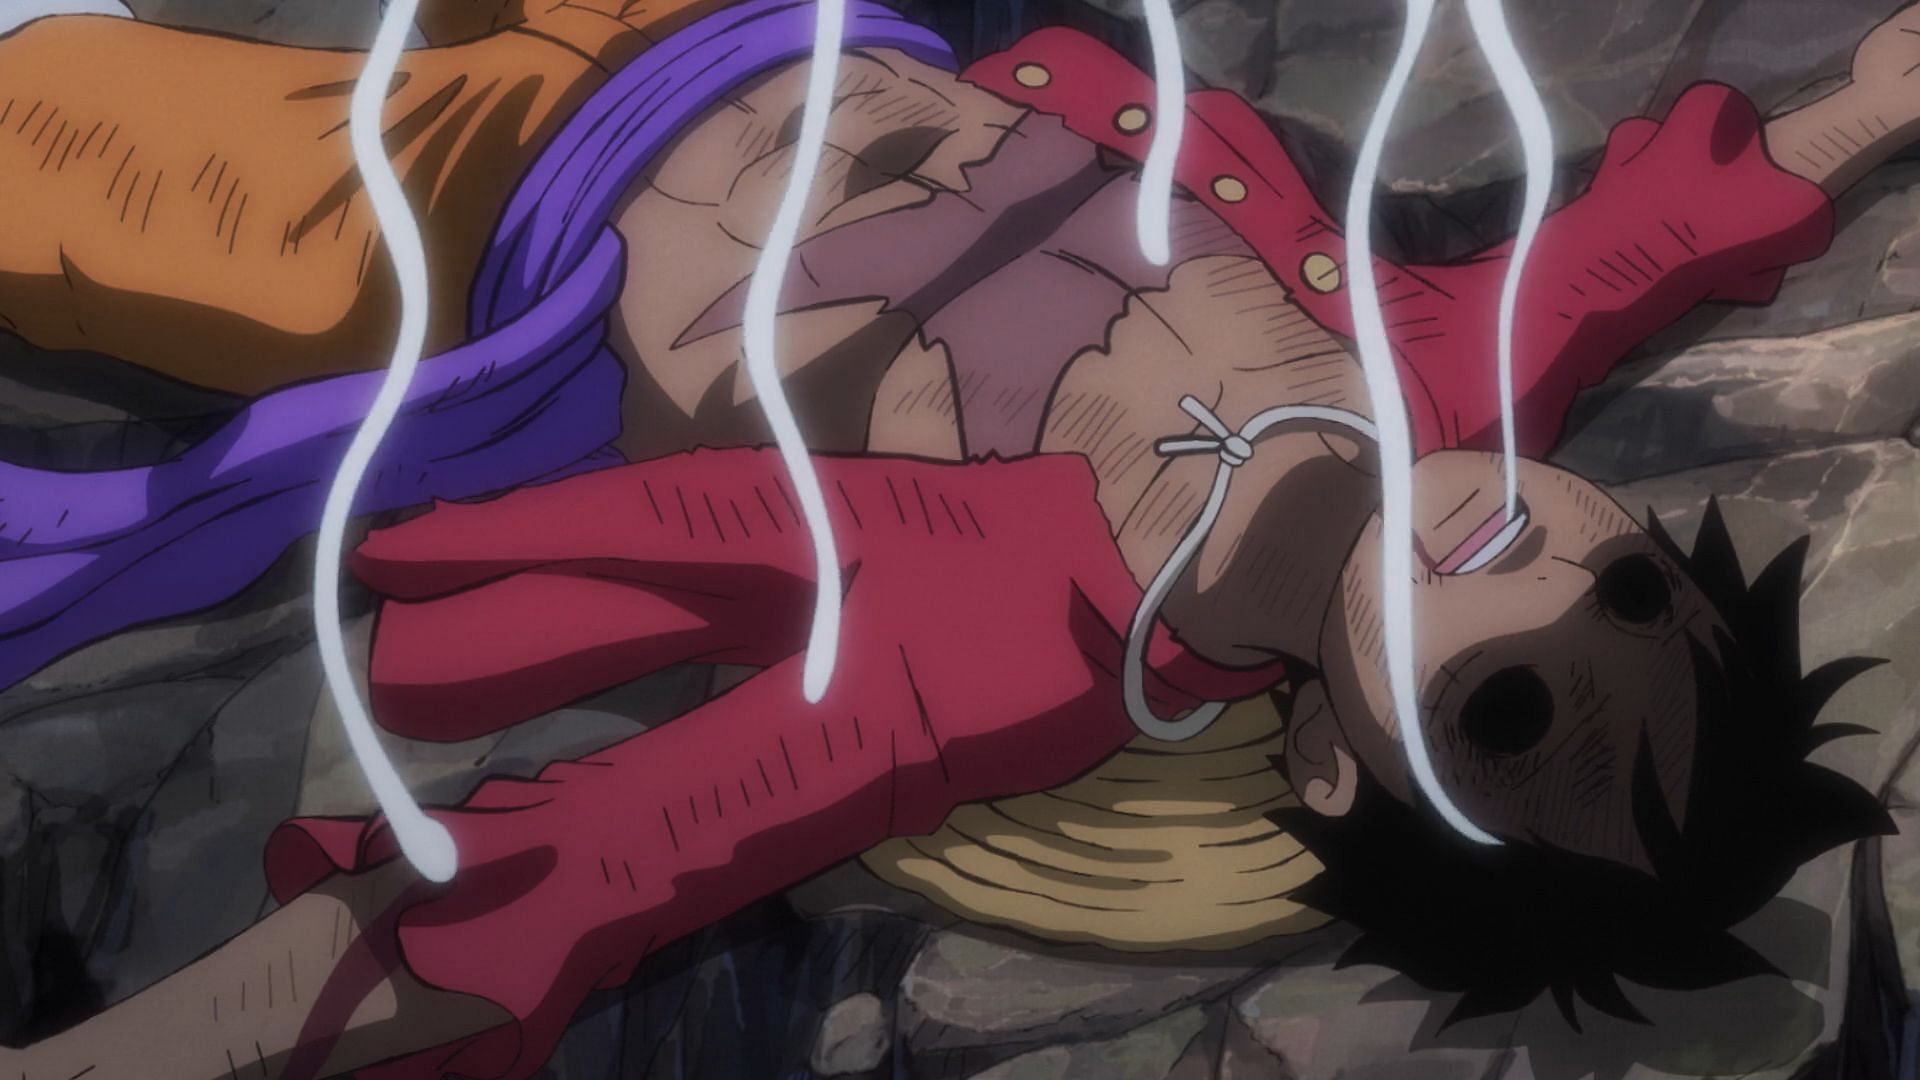 One Piece Cliffhanger Teases Gear 5 Luffy's Next Fight